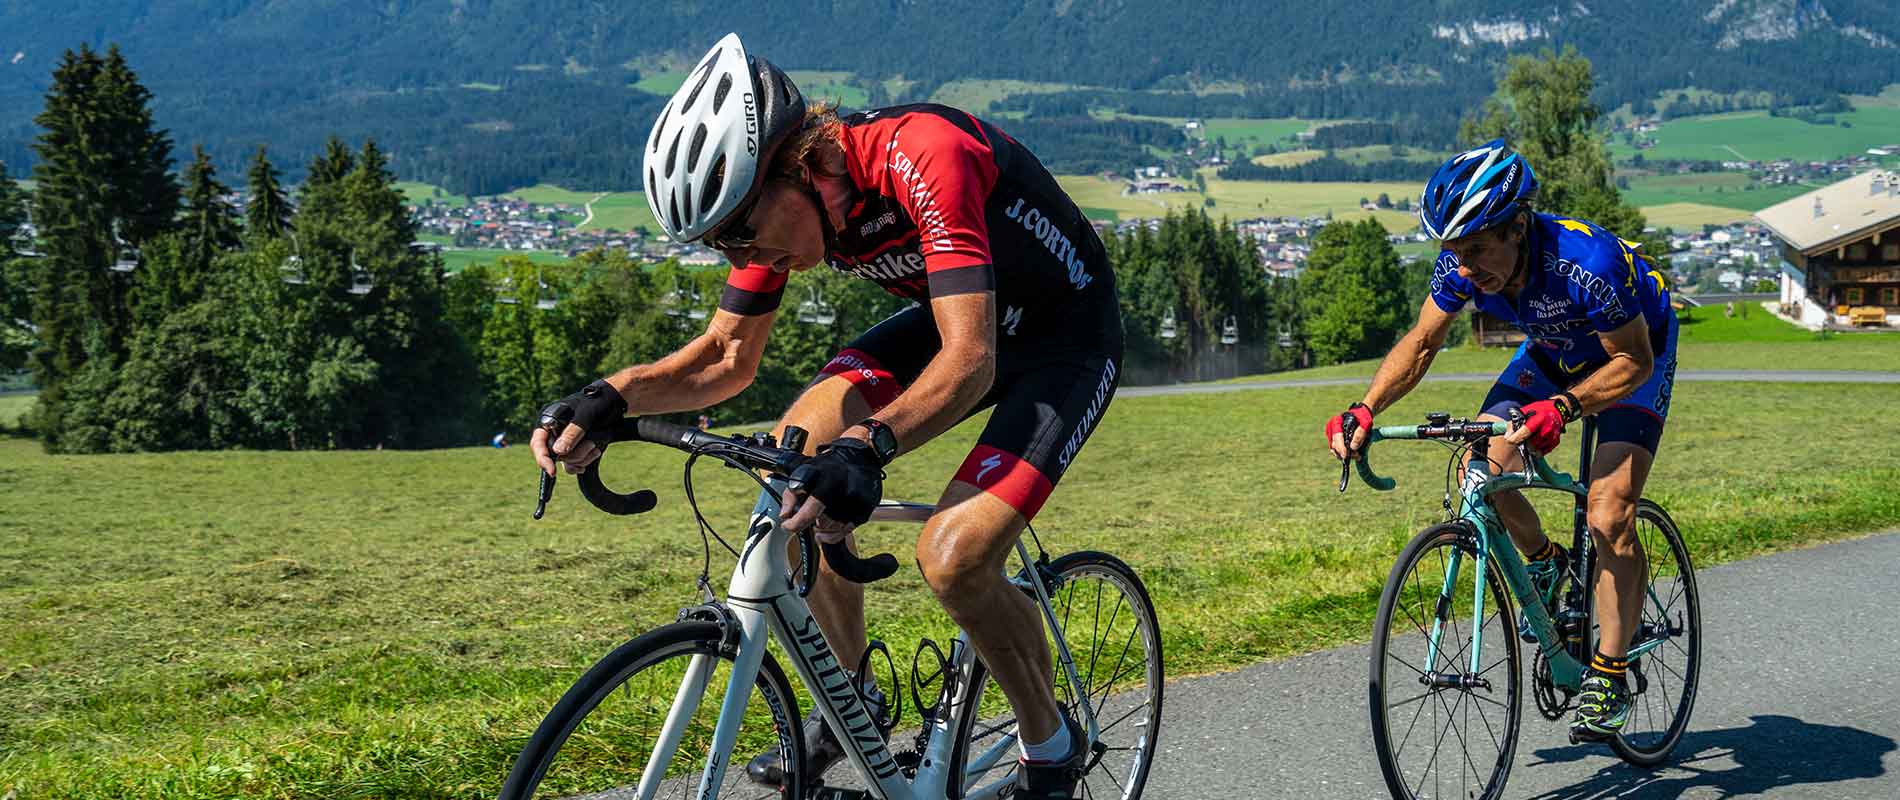 Ride Uphill at the Bergsprint